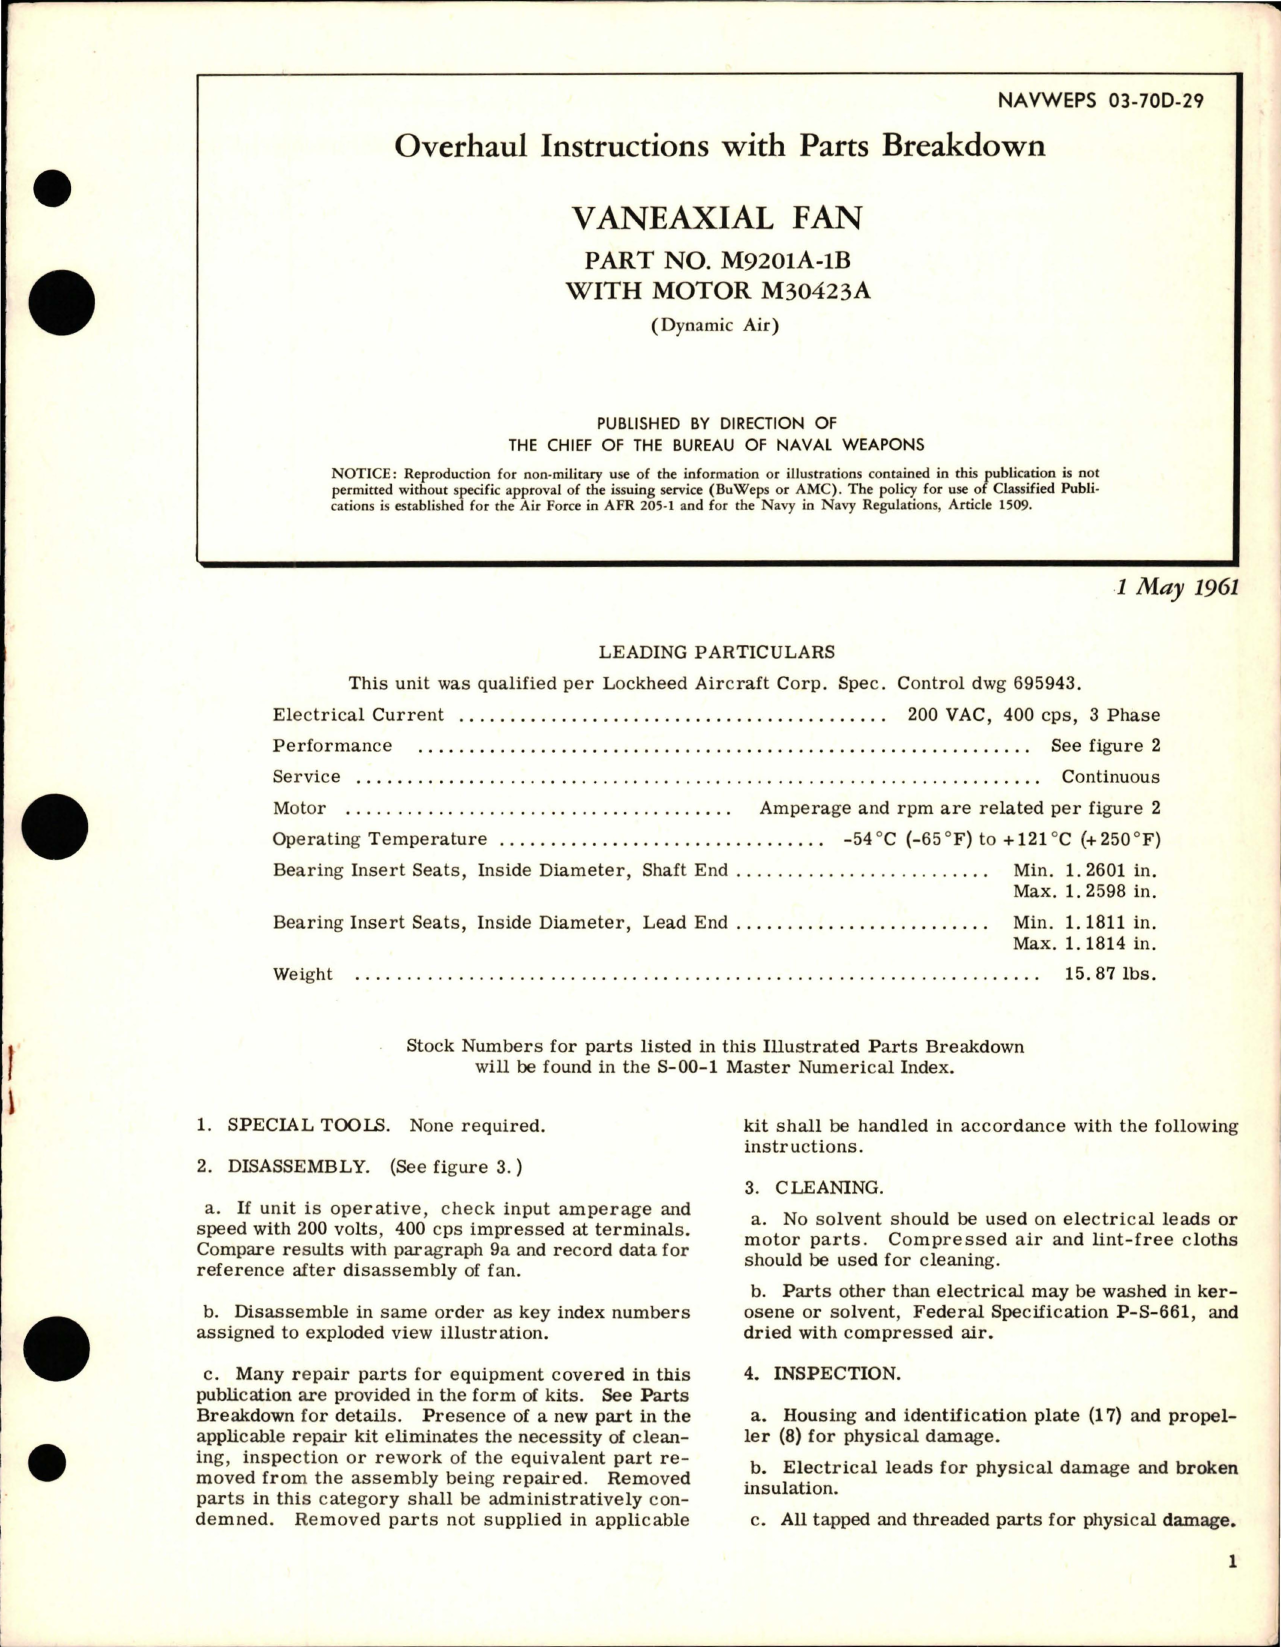 Sample page 1 from AirCorps Library document: Overhaul Instructions with Parts Breakdown for Vaneaxial Fan - Part M9201A-1B with Motor M30423A